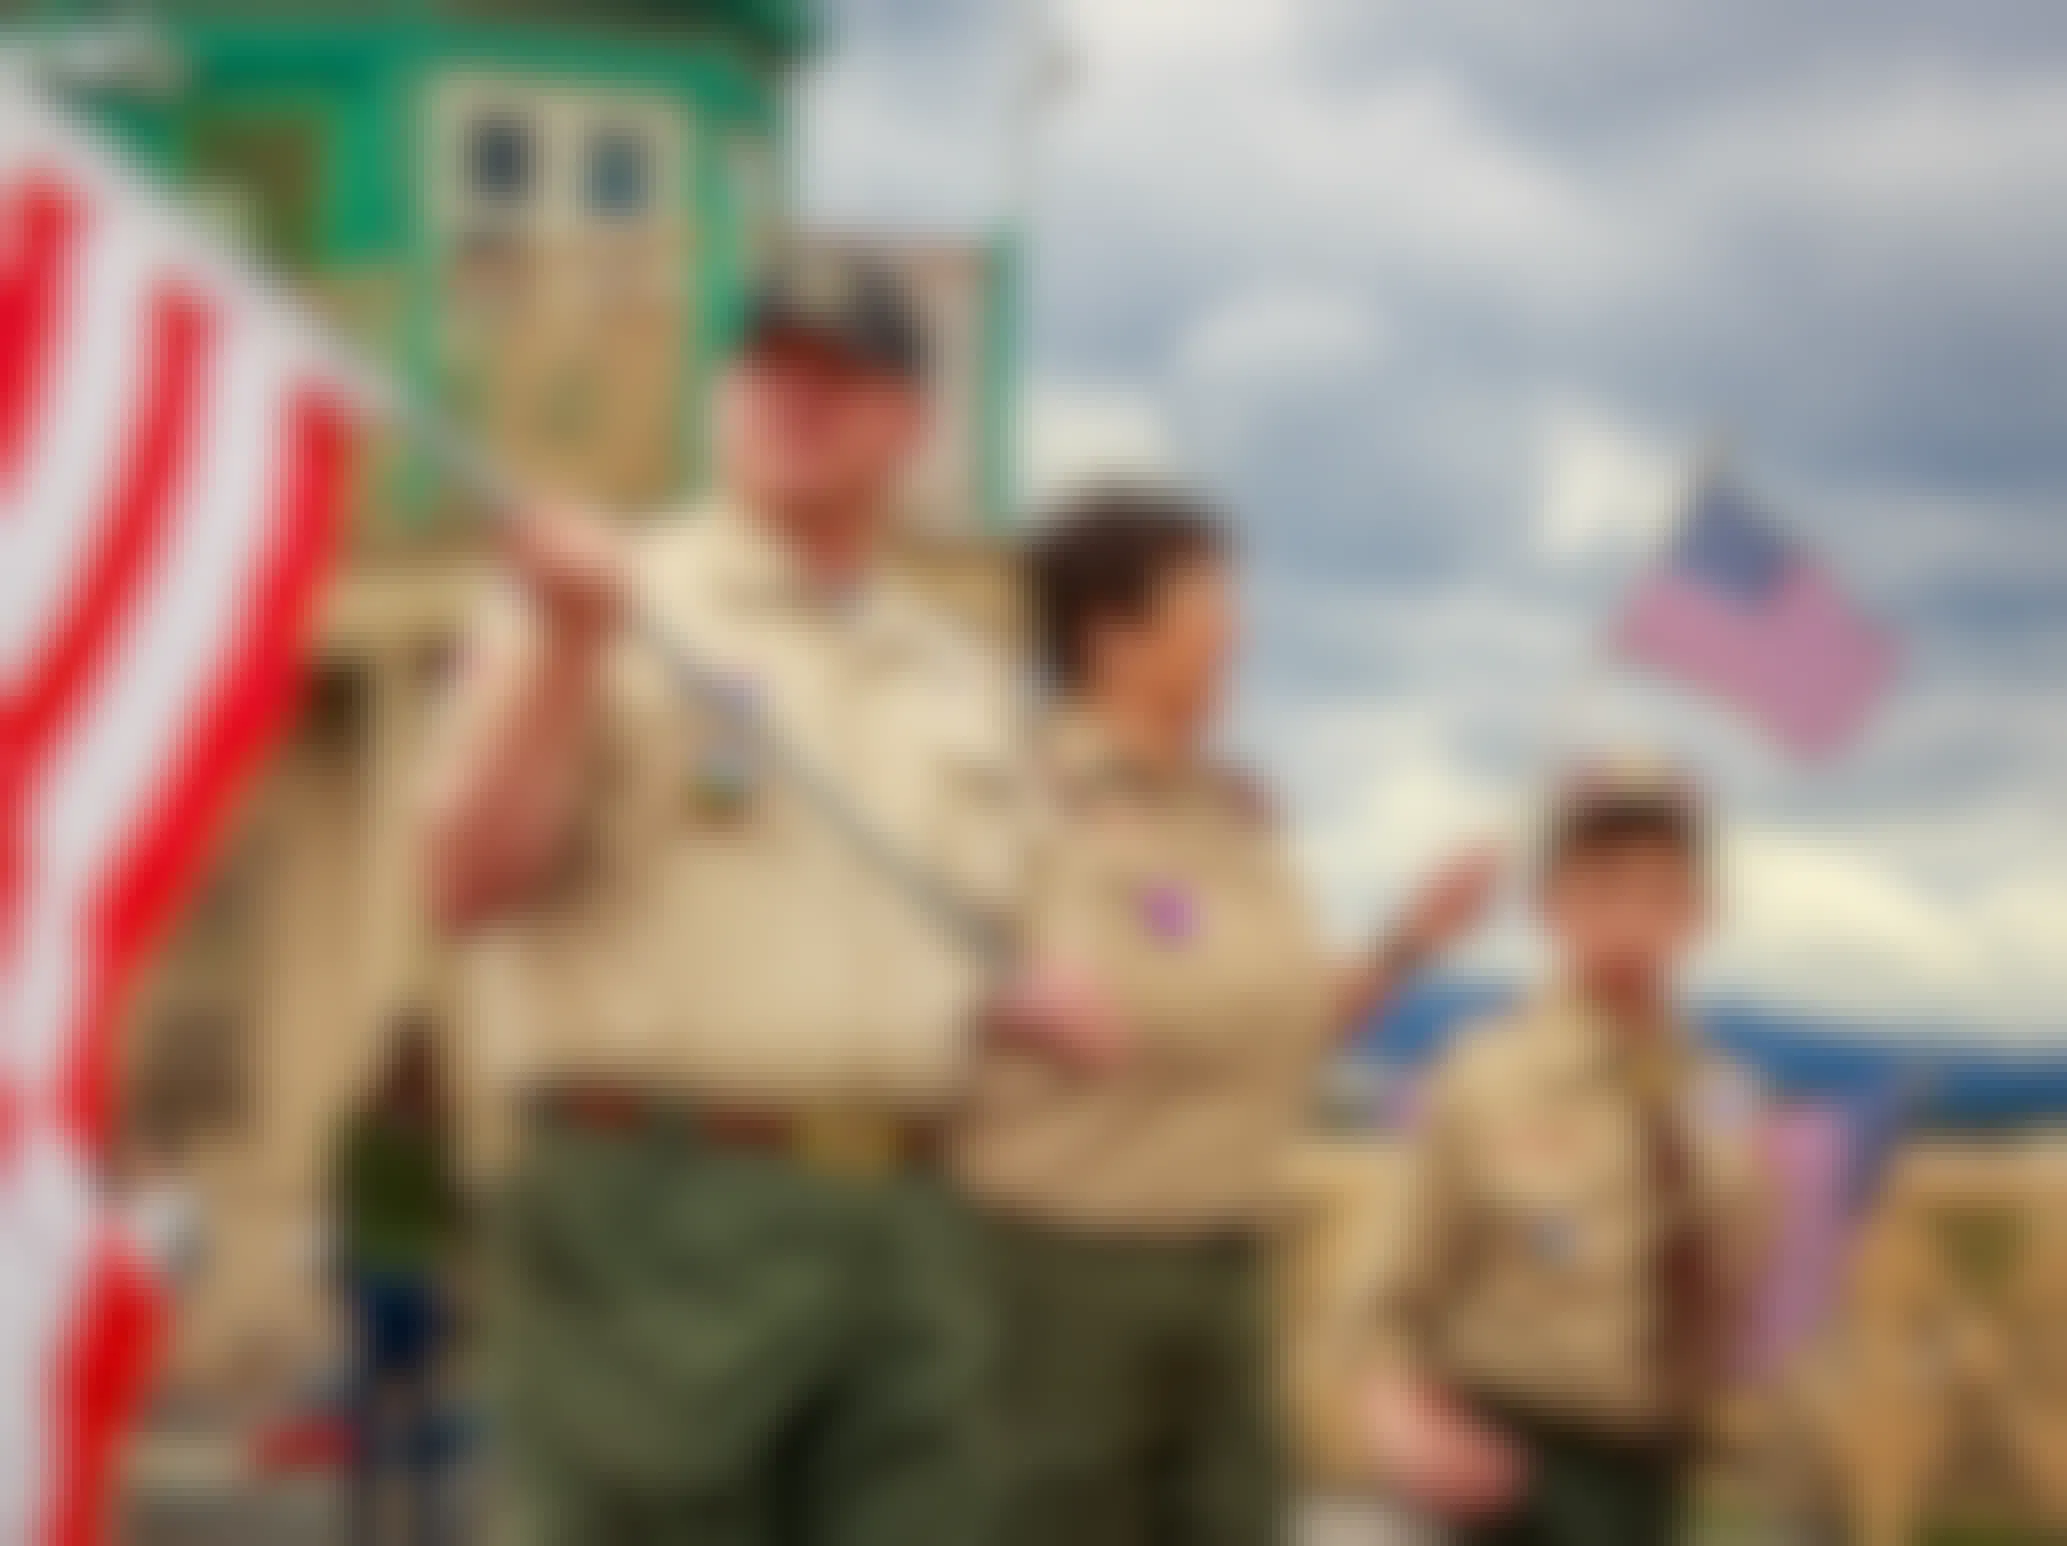 A boy scout troop and leader walking in a parade with American flags.